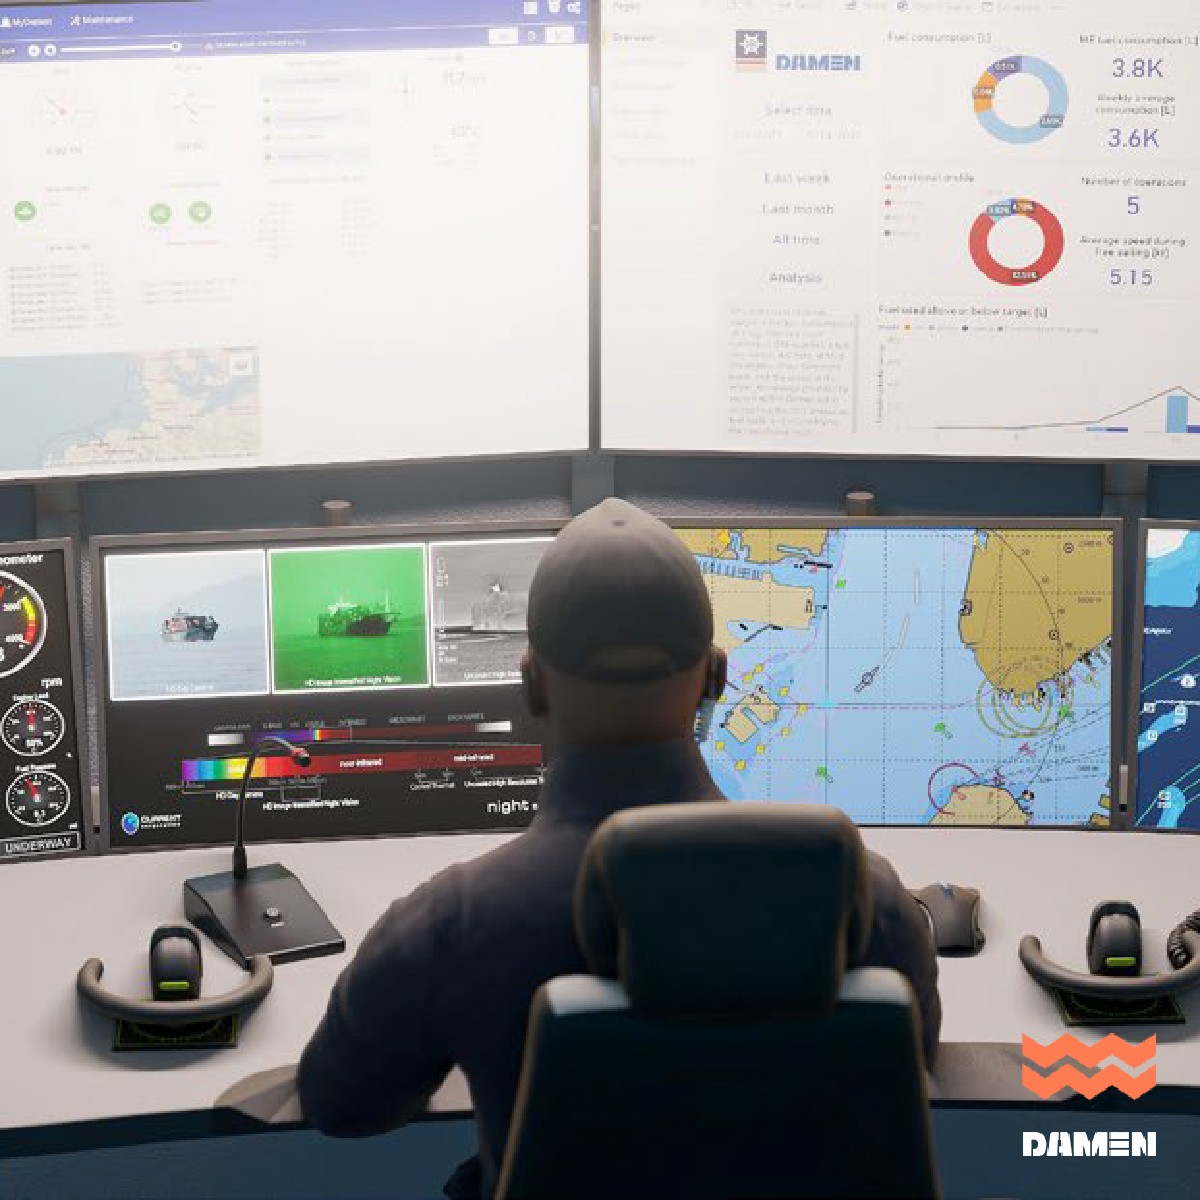 With a Damen Triton system onboard its recently delivered ASD Tug 2811, the National Energy Corporation of Trinidad & Tobago can remotely monitor almost every aspect of its operations in real time, to ensure maximum efficiency and economy.